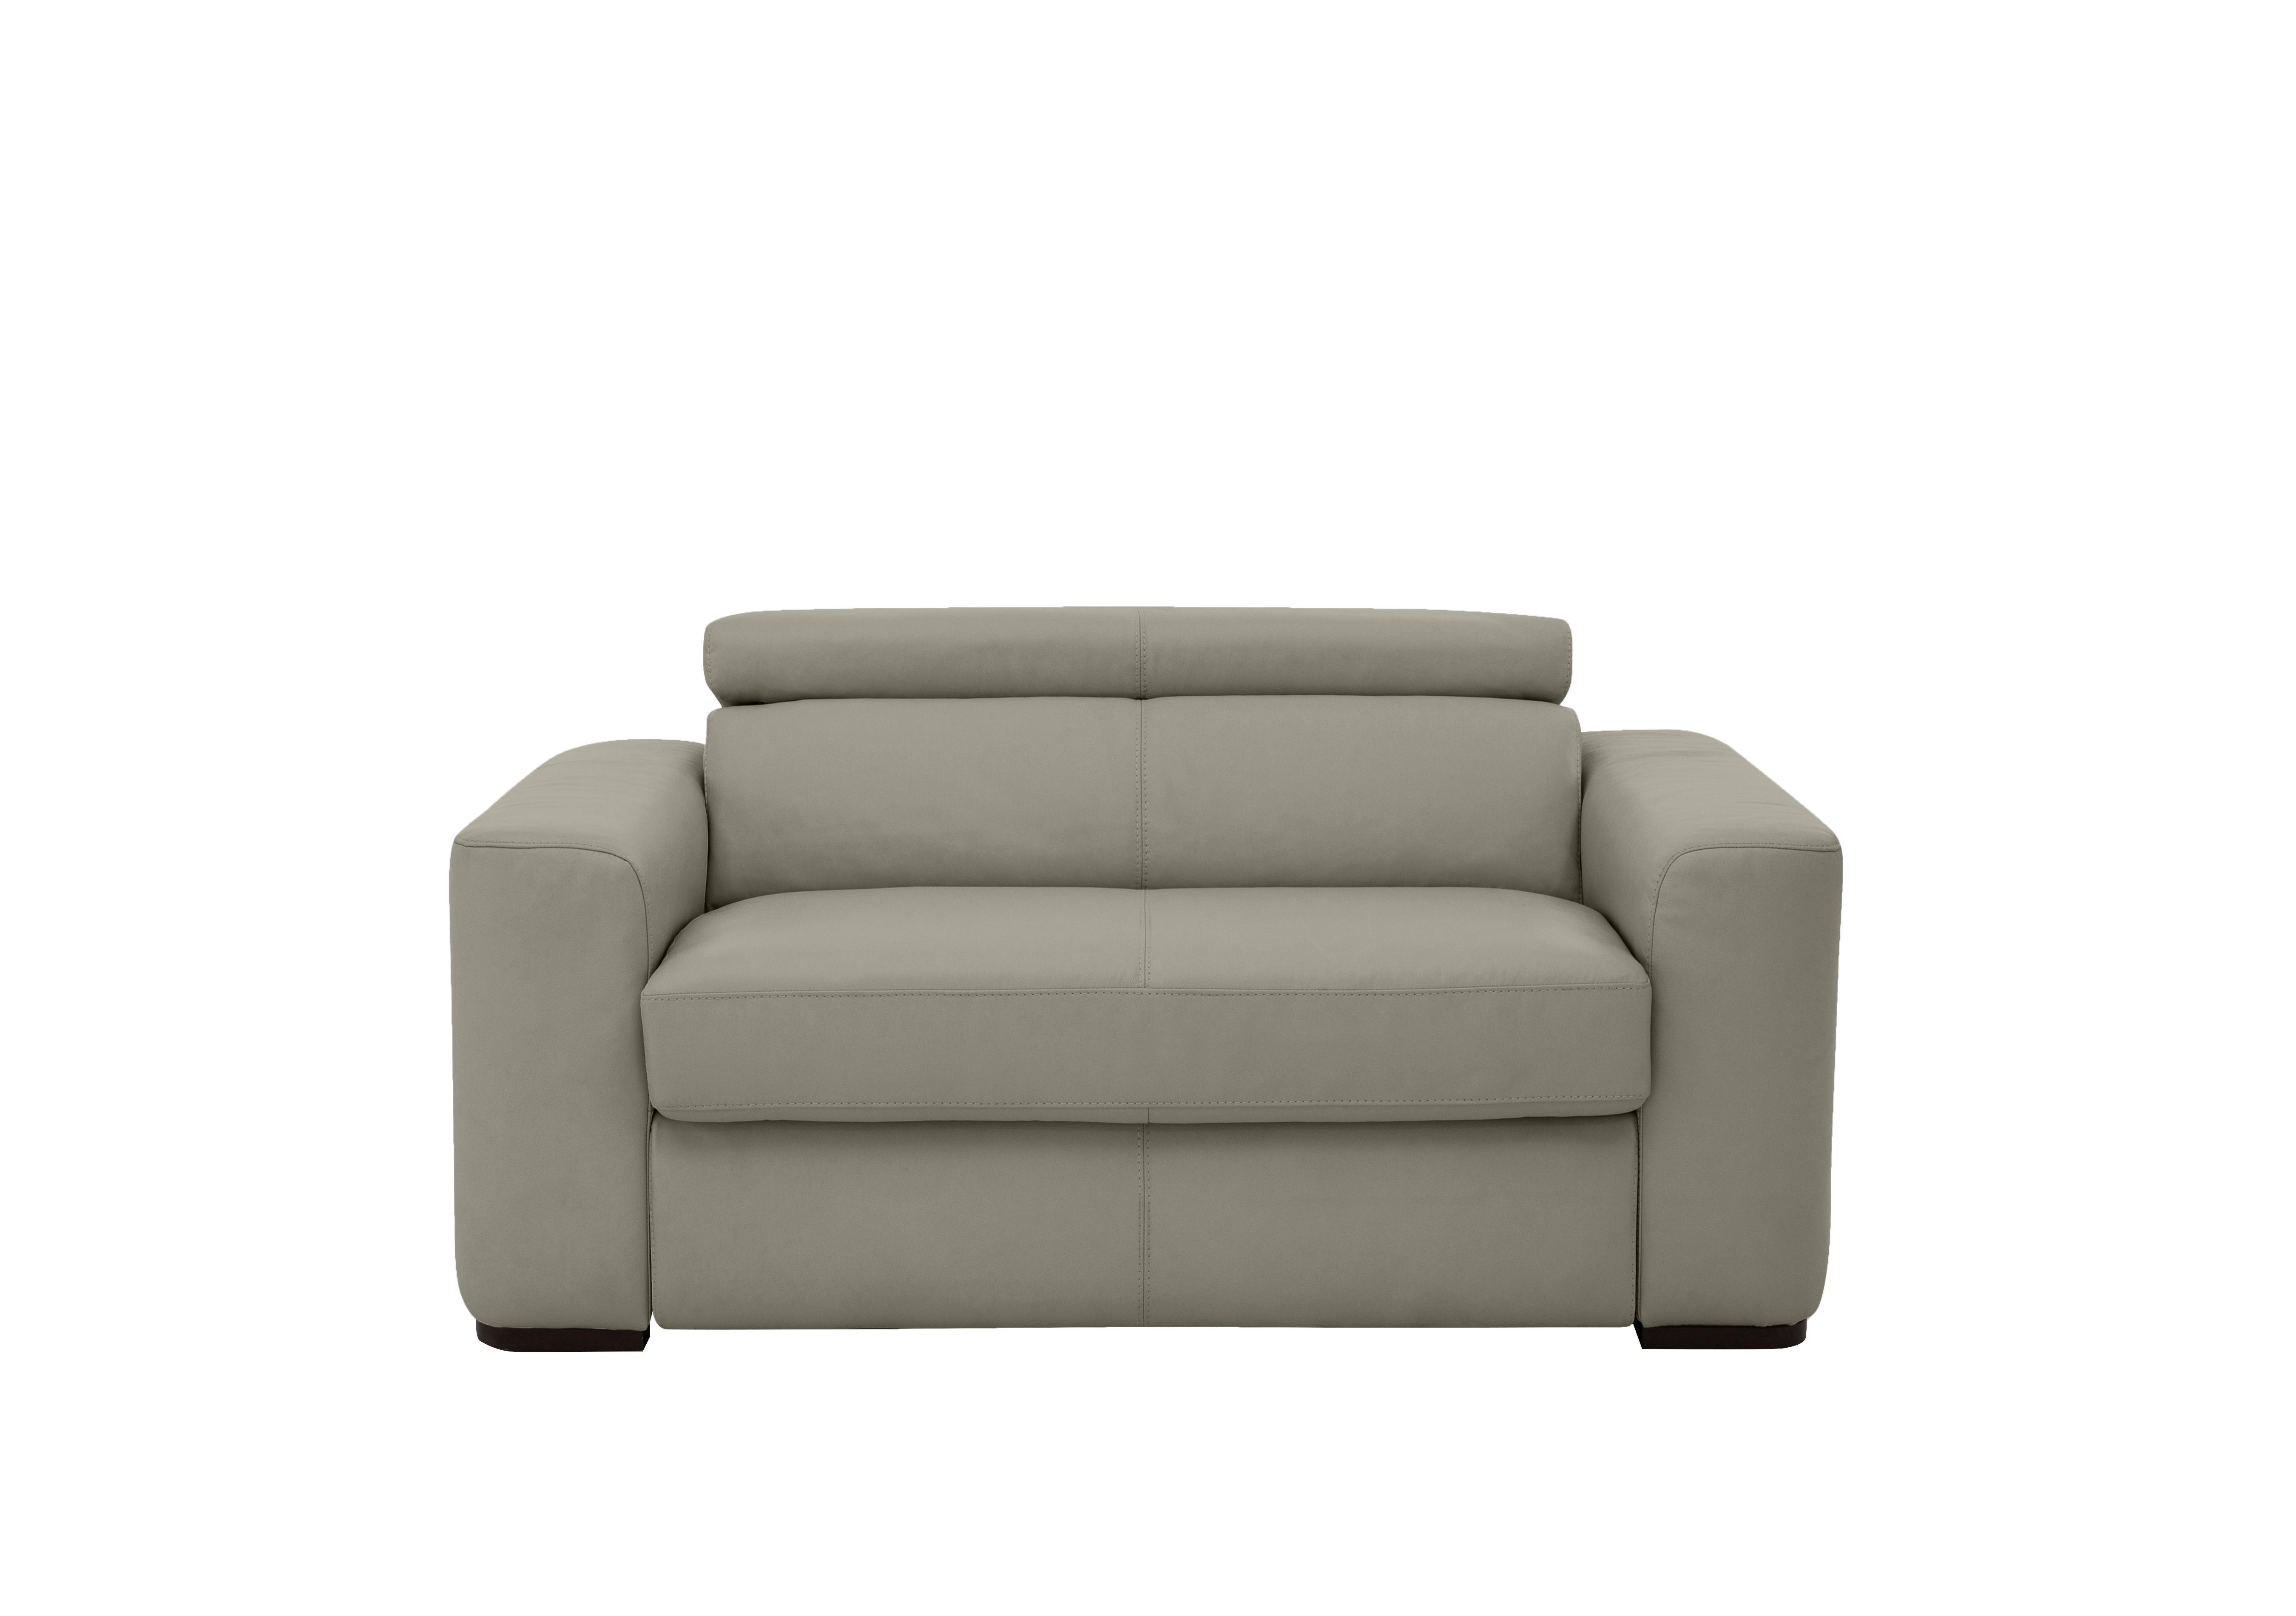 Infinity Leather Chair Sofabed in Bv-946b Silver Grey on Furniture Village